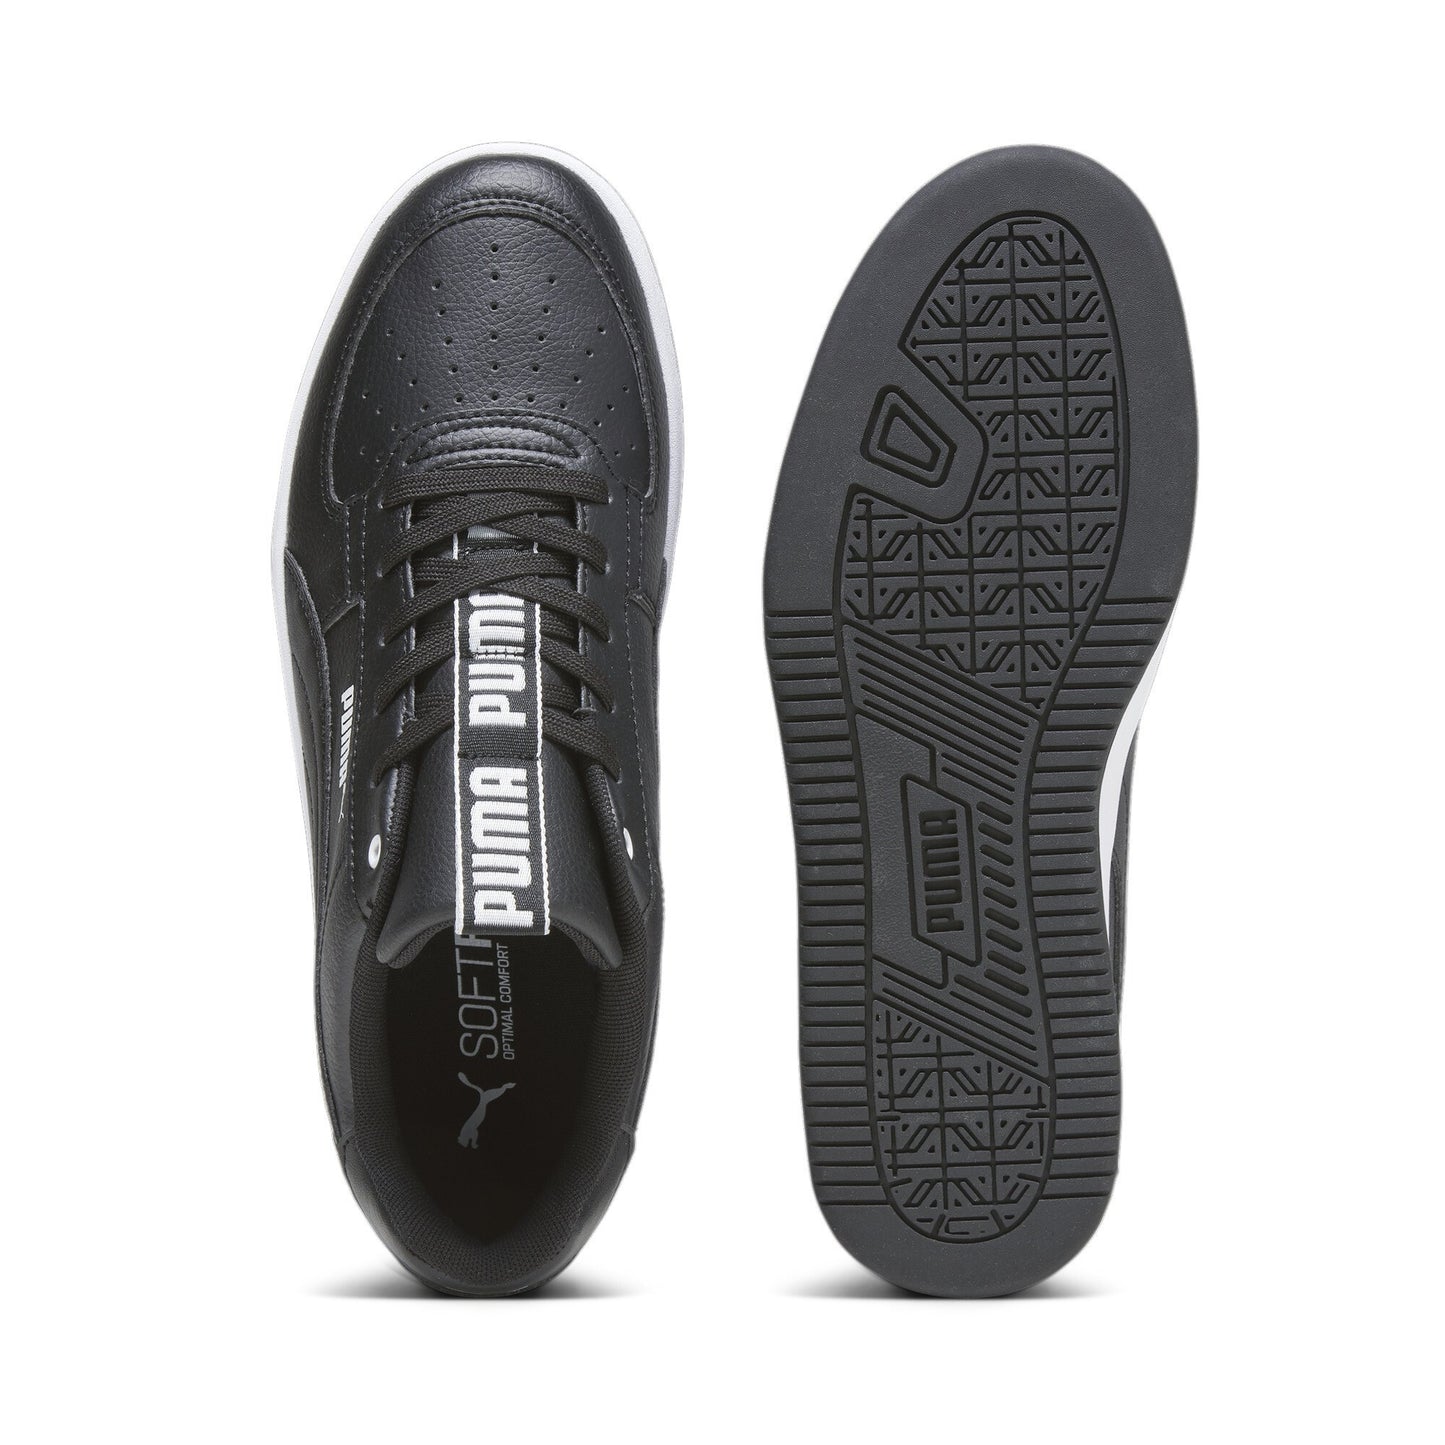 Puma - Sneakers Caven 2.0 Logobsession